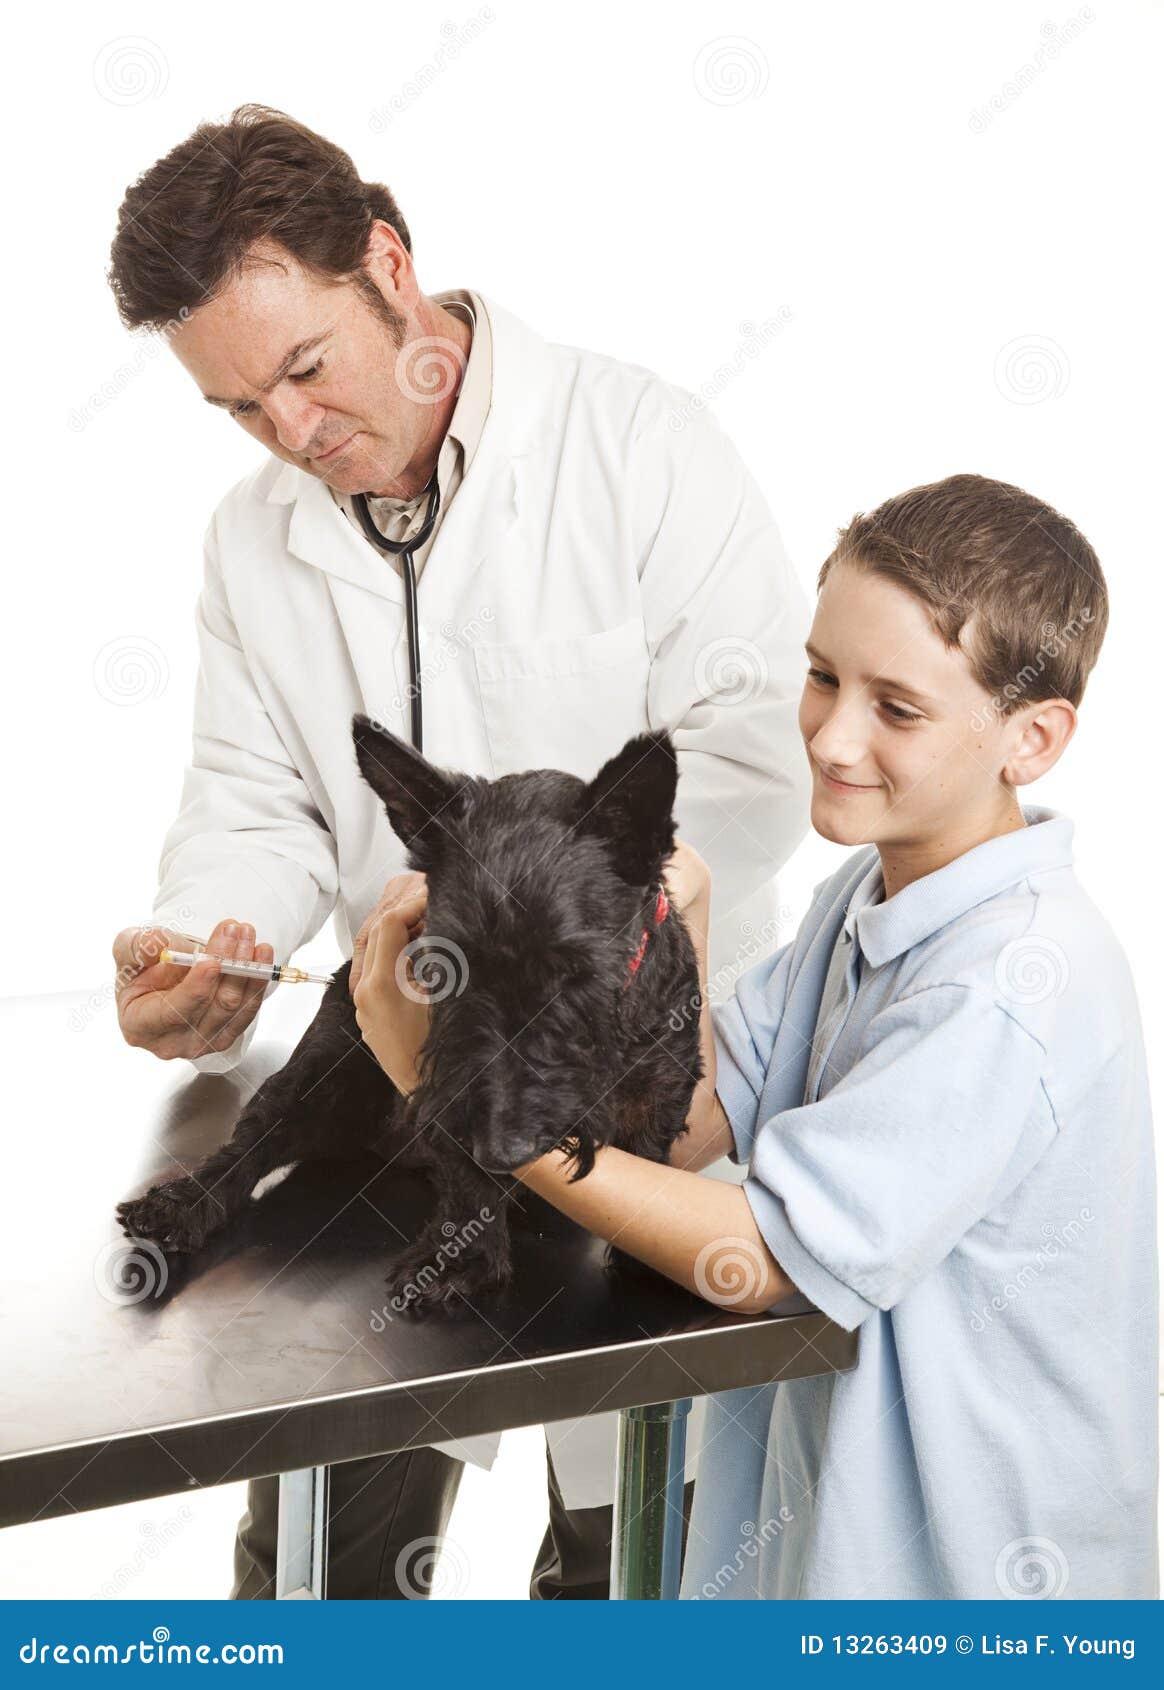 Veterinarian Giving Vaccination Stock Image Image of